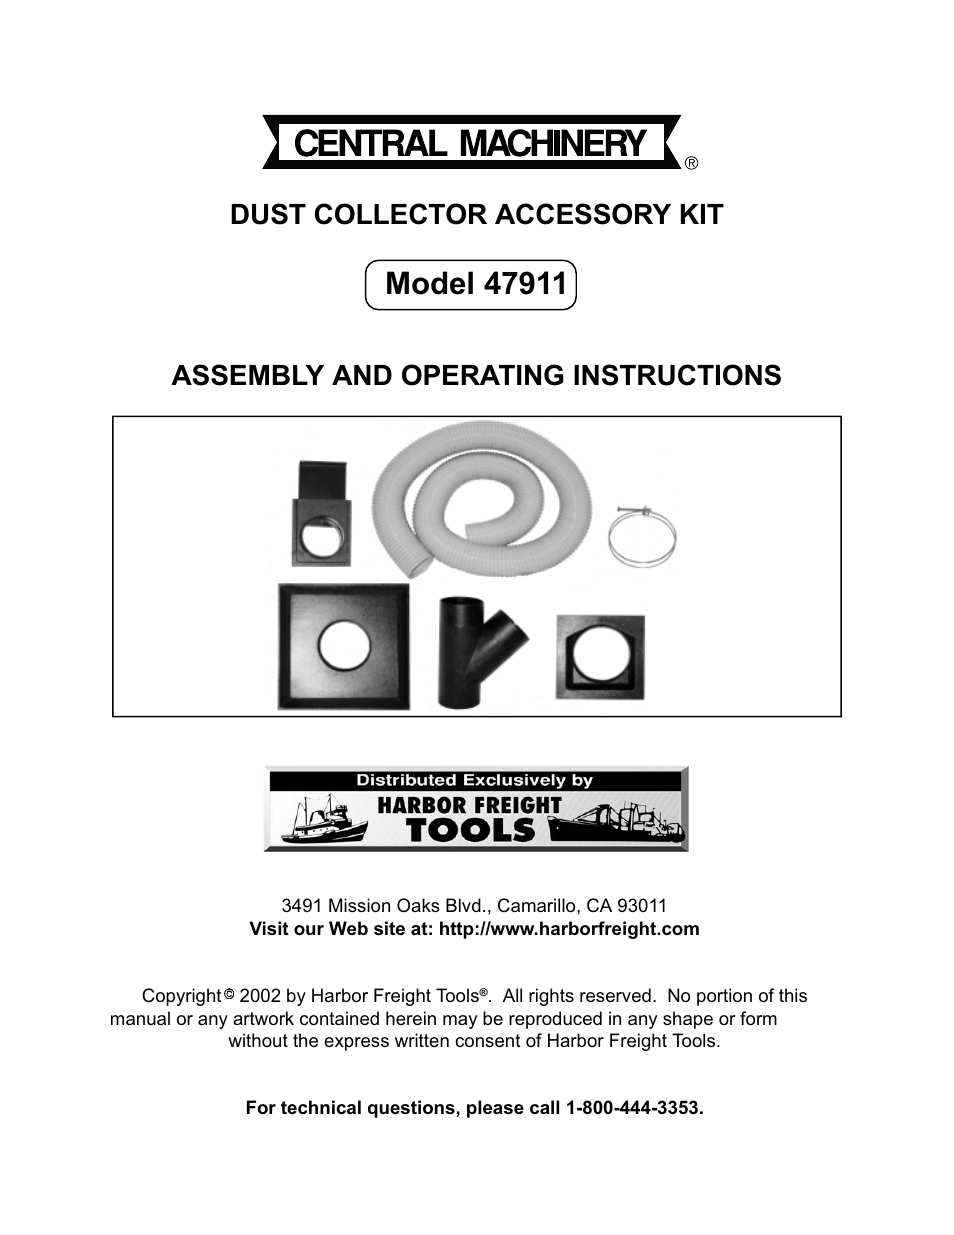 Harbor Freight Tools 47911 User Manual | 6 pages